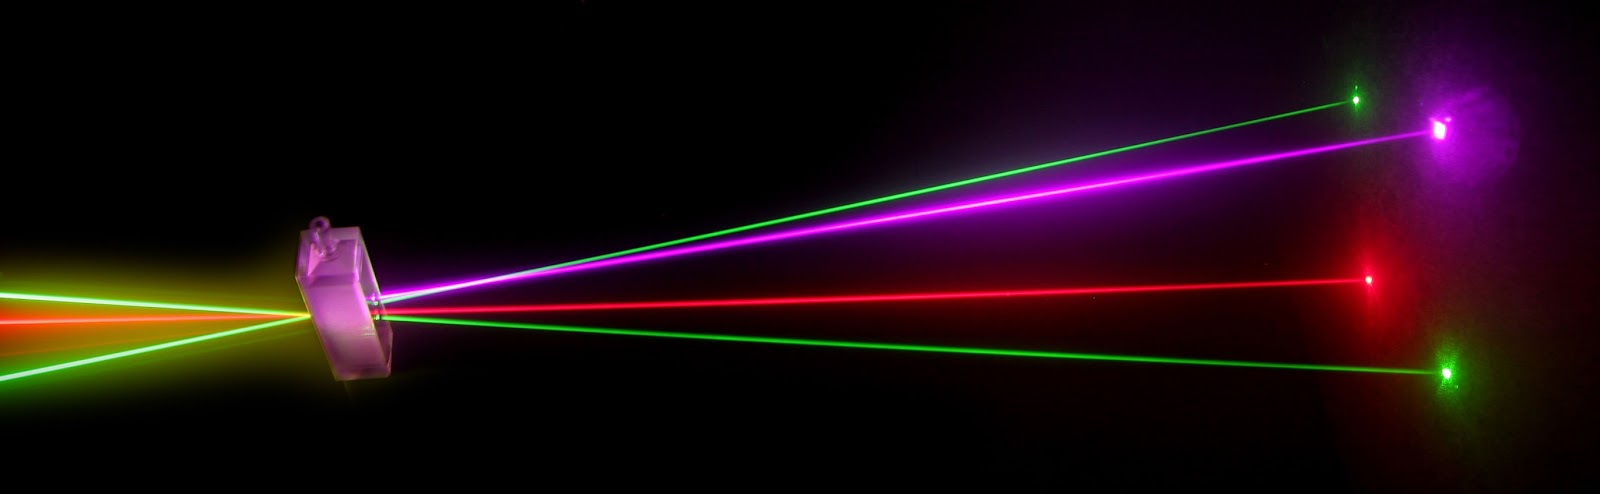 which best explains why one laser beam might appear blue and another laser beam might appear red?